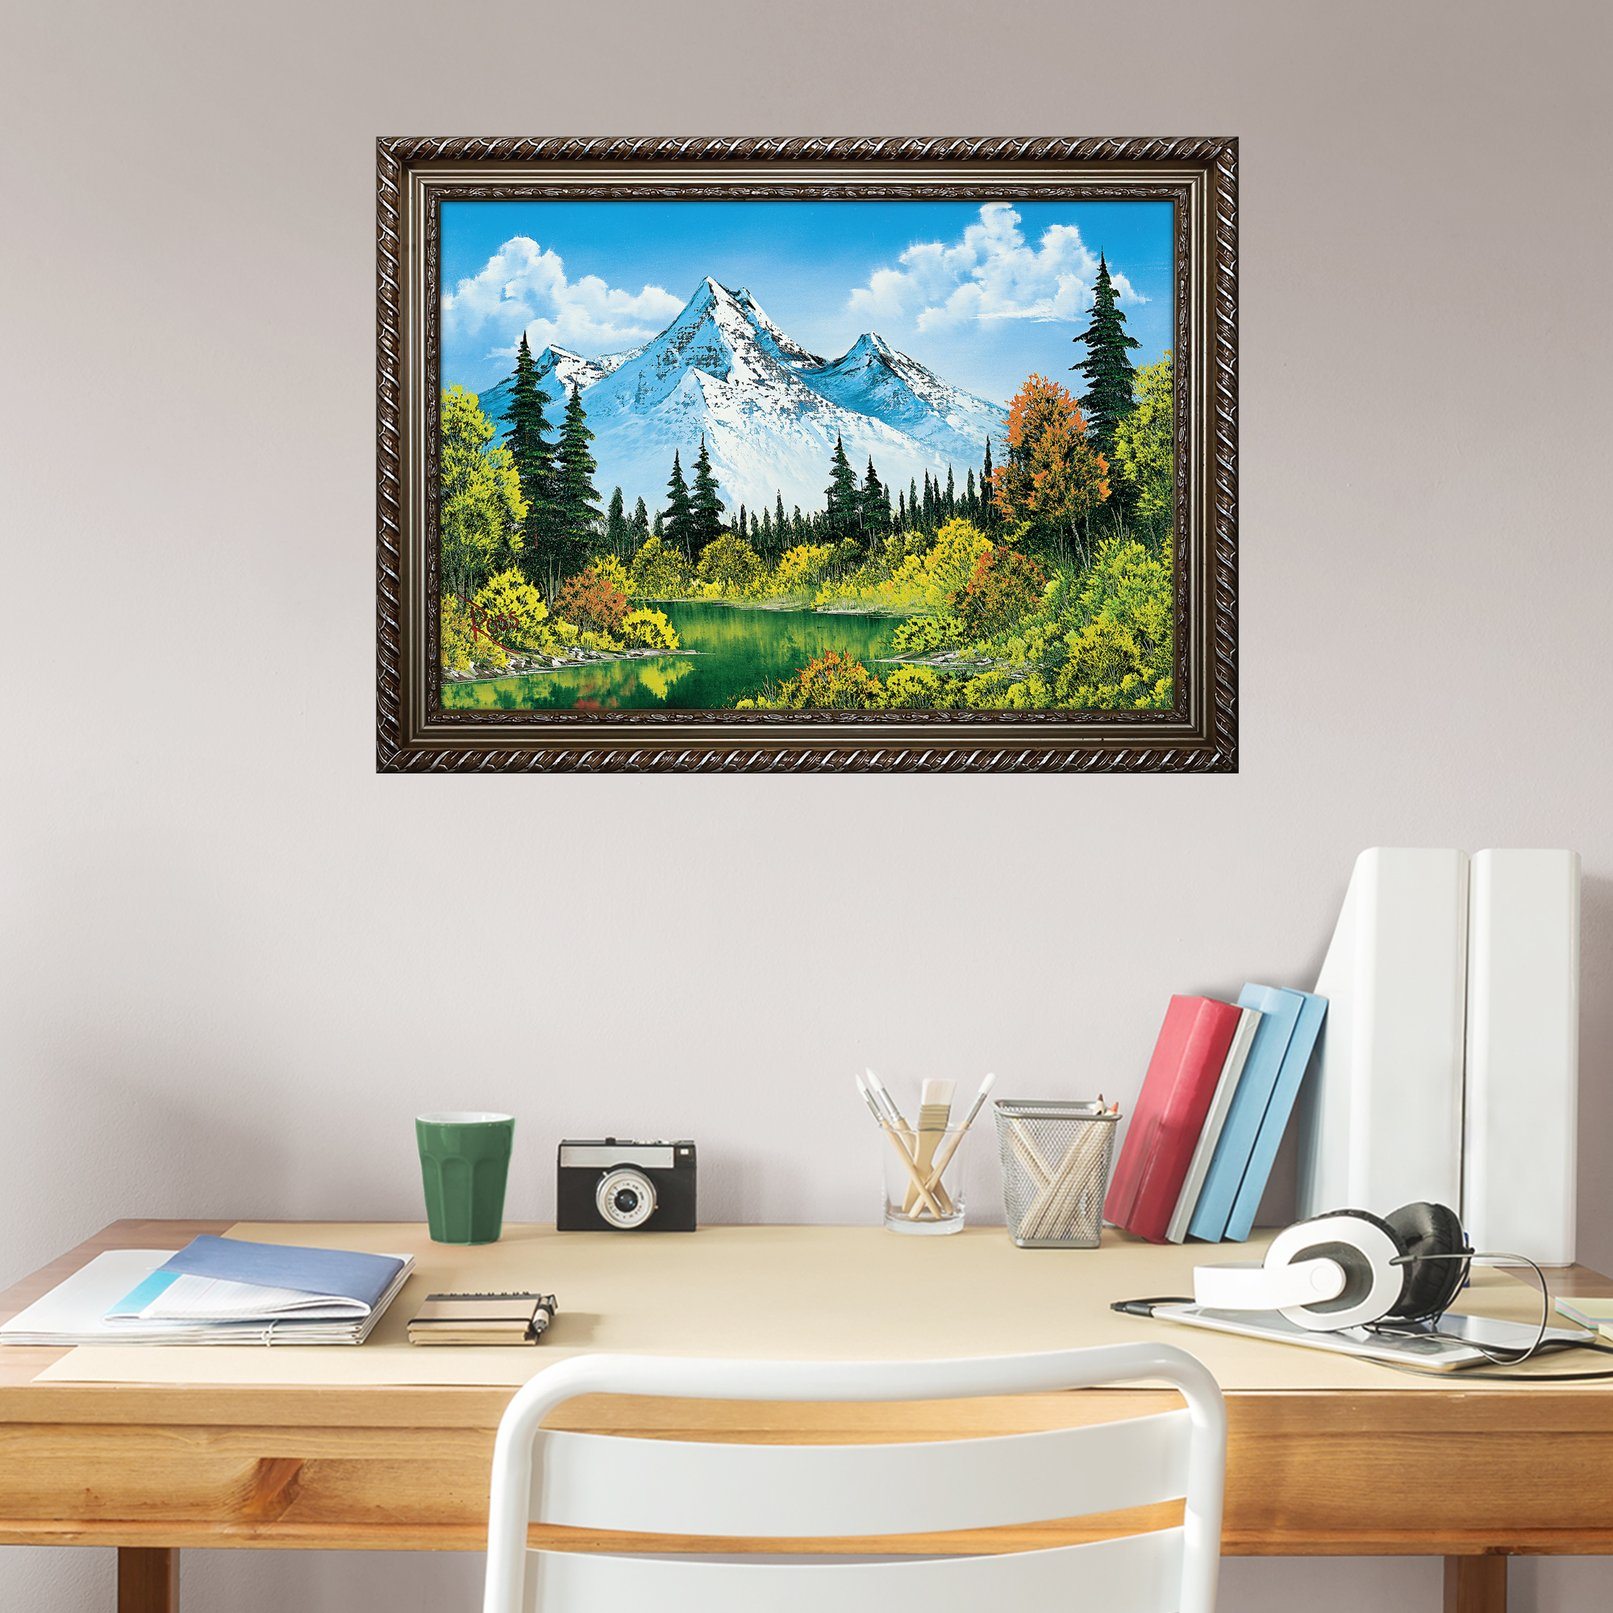 https://fathead.com/collections/bob-ross/products/m1700-00034?variant=33181831331928